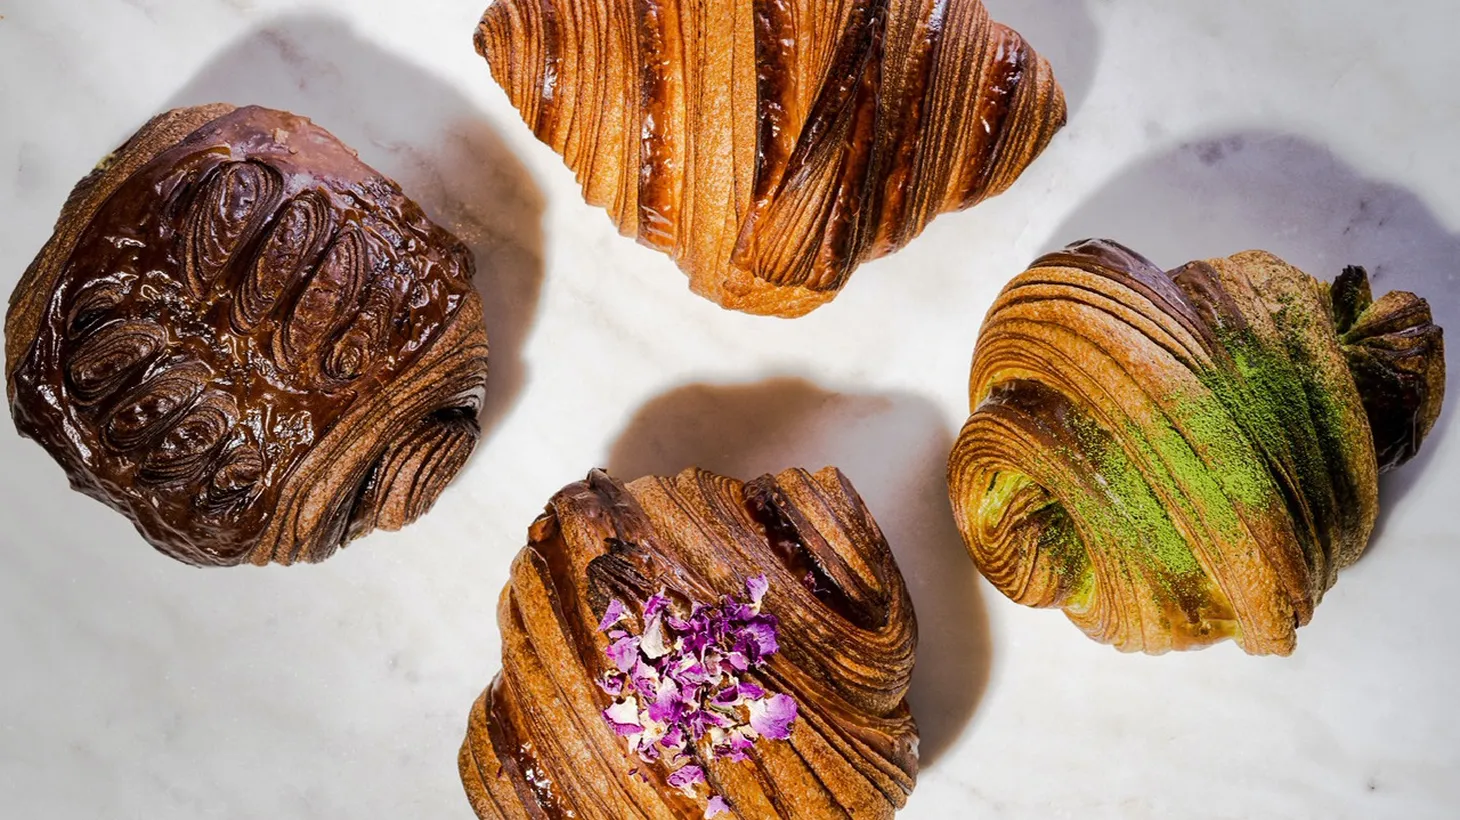 An assortment of croissants from Artelice Pâtisserie (clockwise starting at the top): a classic croissant, a matcha croissant, a Persian Princess (rose and orange blossom dough with pistachio filling), and a passion fruit pain au chocolat.